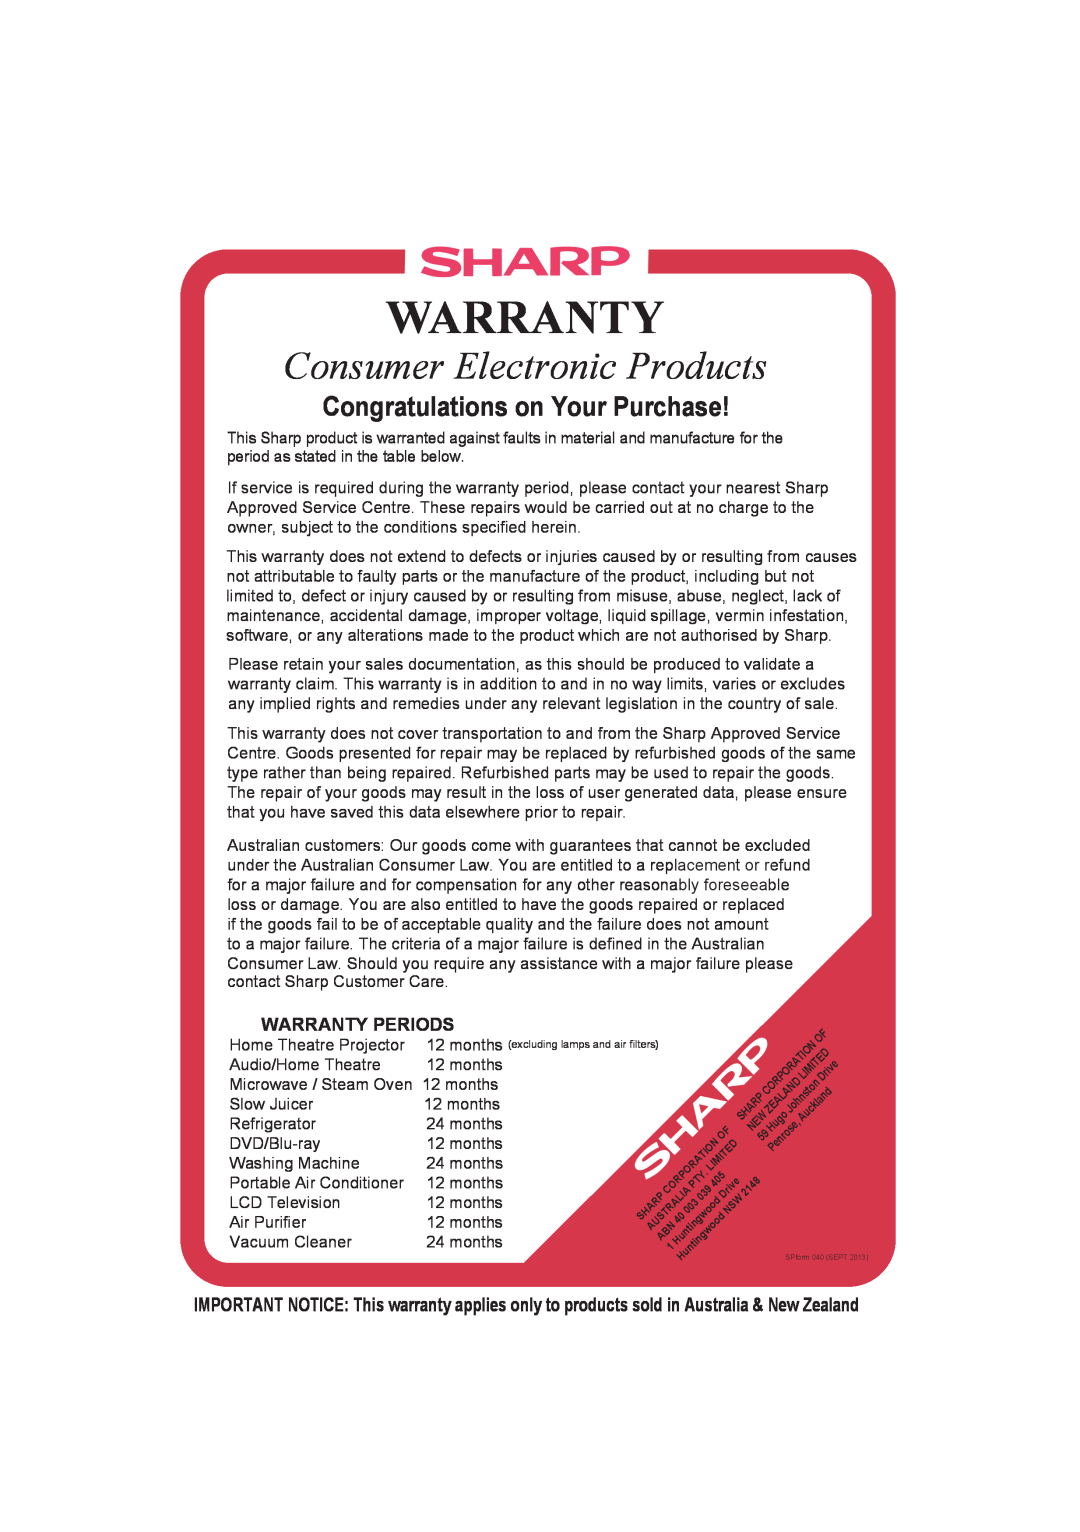 Sharp R-980J, R-990K(S)/(W), R-990J(S) Consumer Electronic Products, Congratulations on Your Purchase, Warranty Periods 